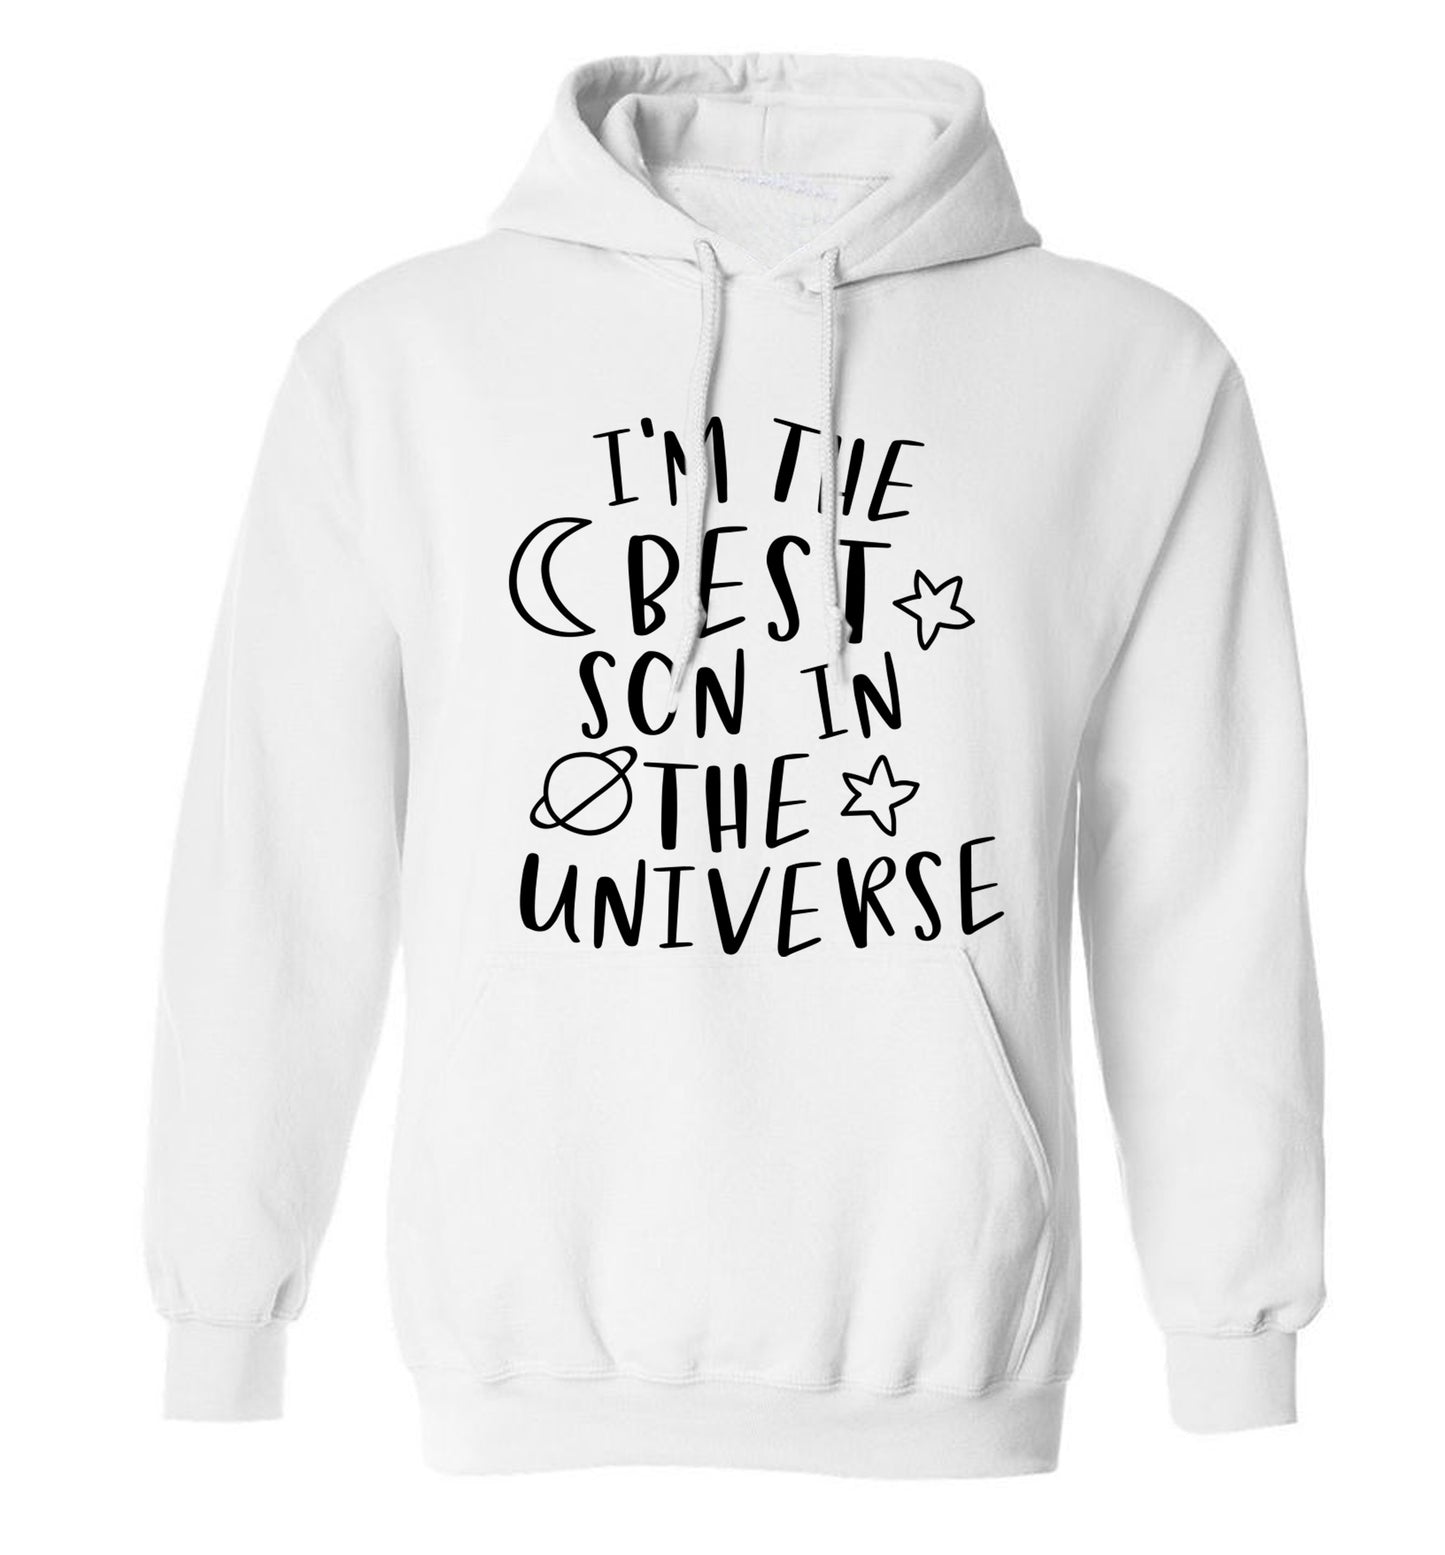 I'm the best son in the universe adults unisex white hoodie 2XL